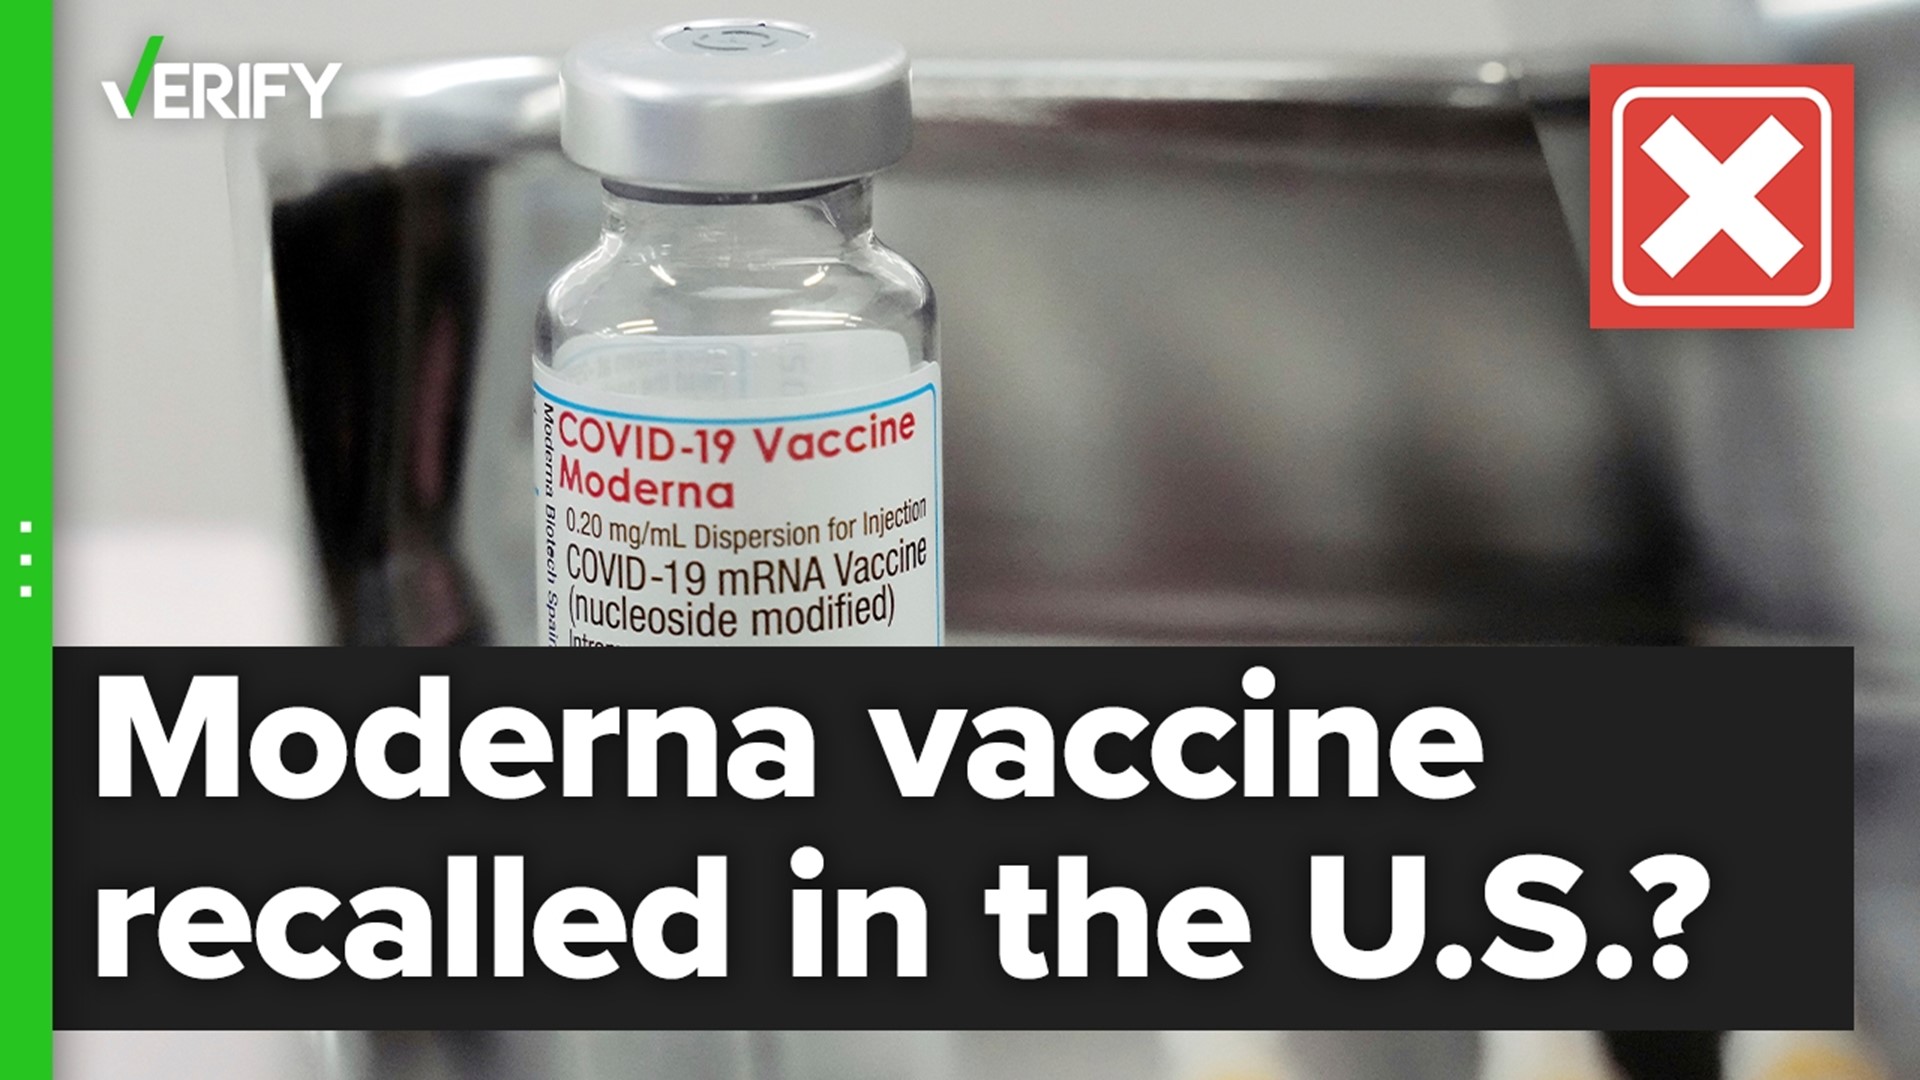 Was the Moderna COVID-19 vaccine recalled in the United States? The VERIFY team confirms this is false.